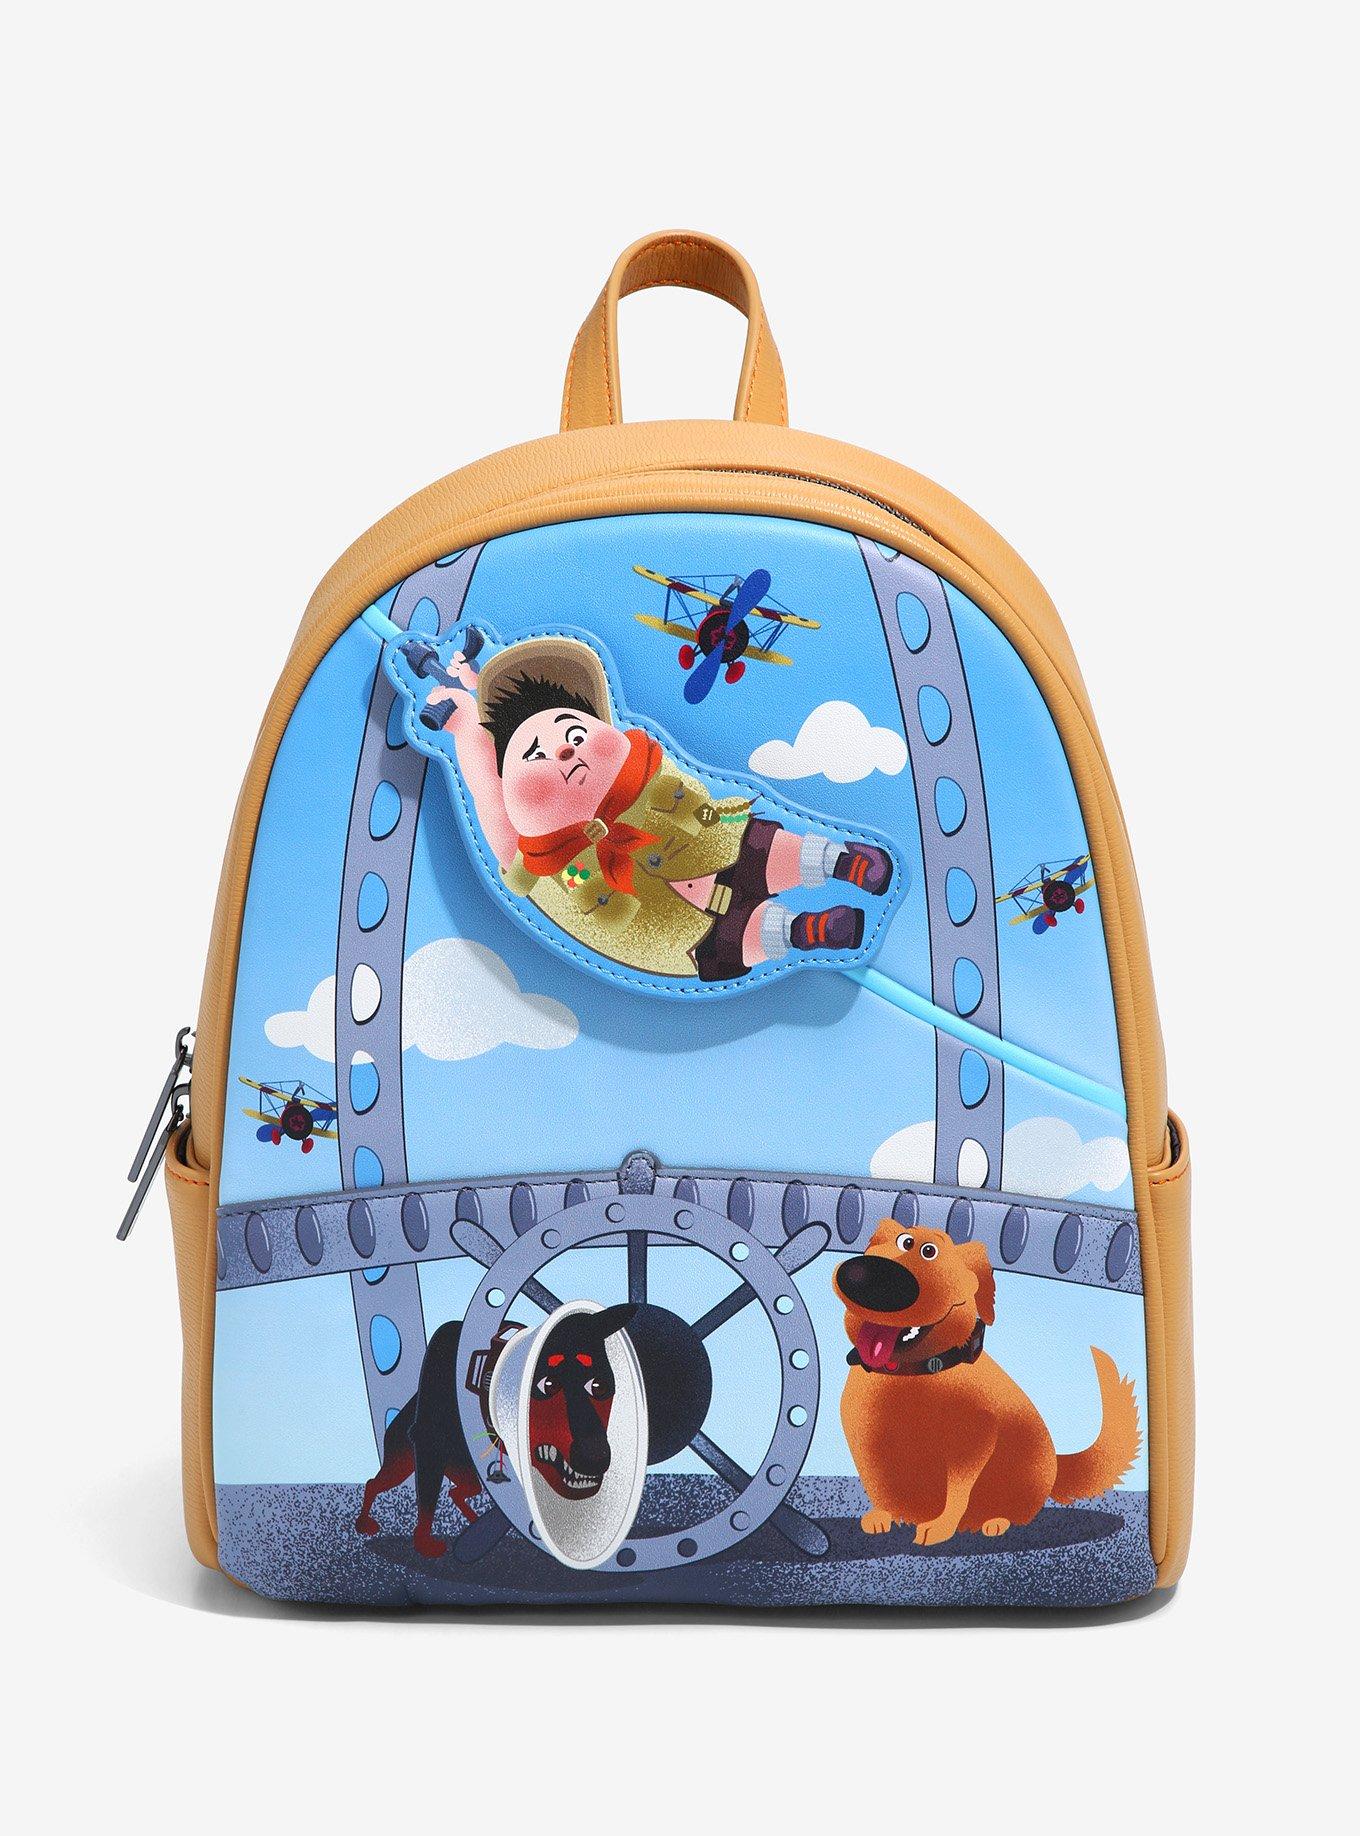 Danielle Nicole Disney Pixar Up Russell The Spirit of Mini Backpack - Exclusive | BoxLunch